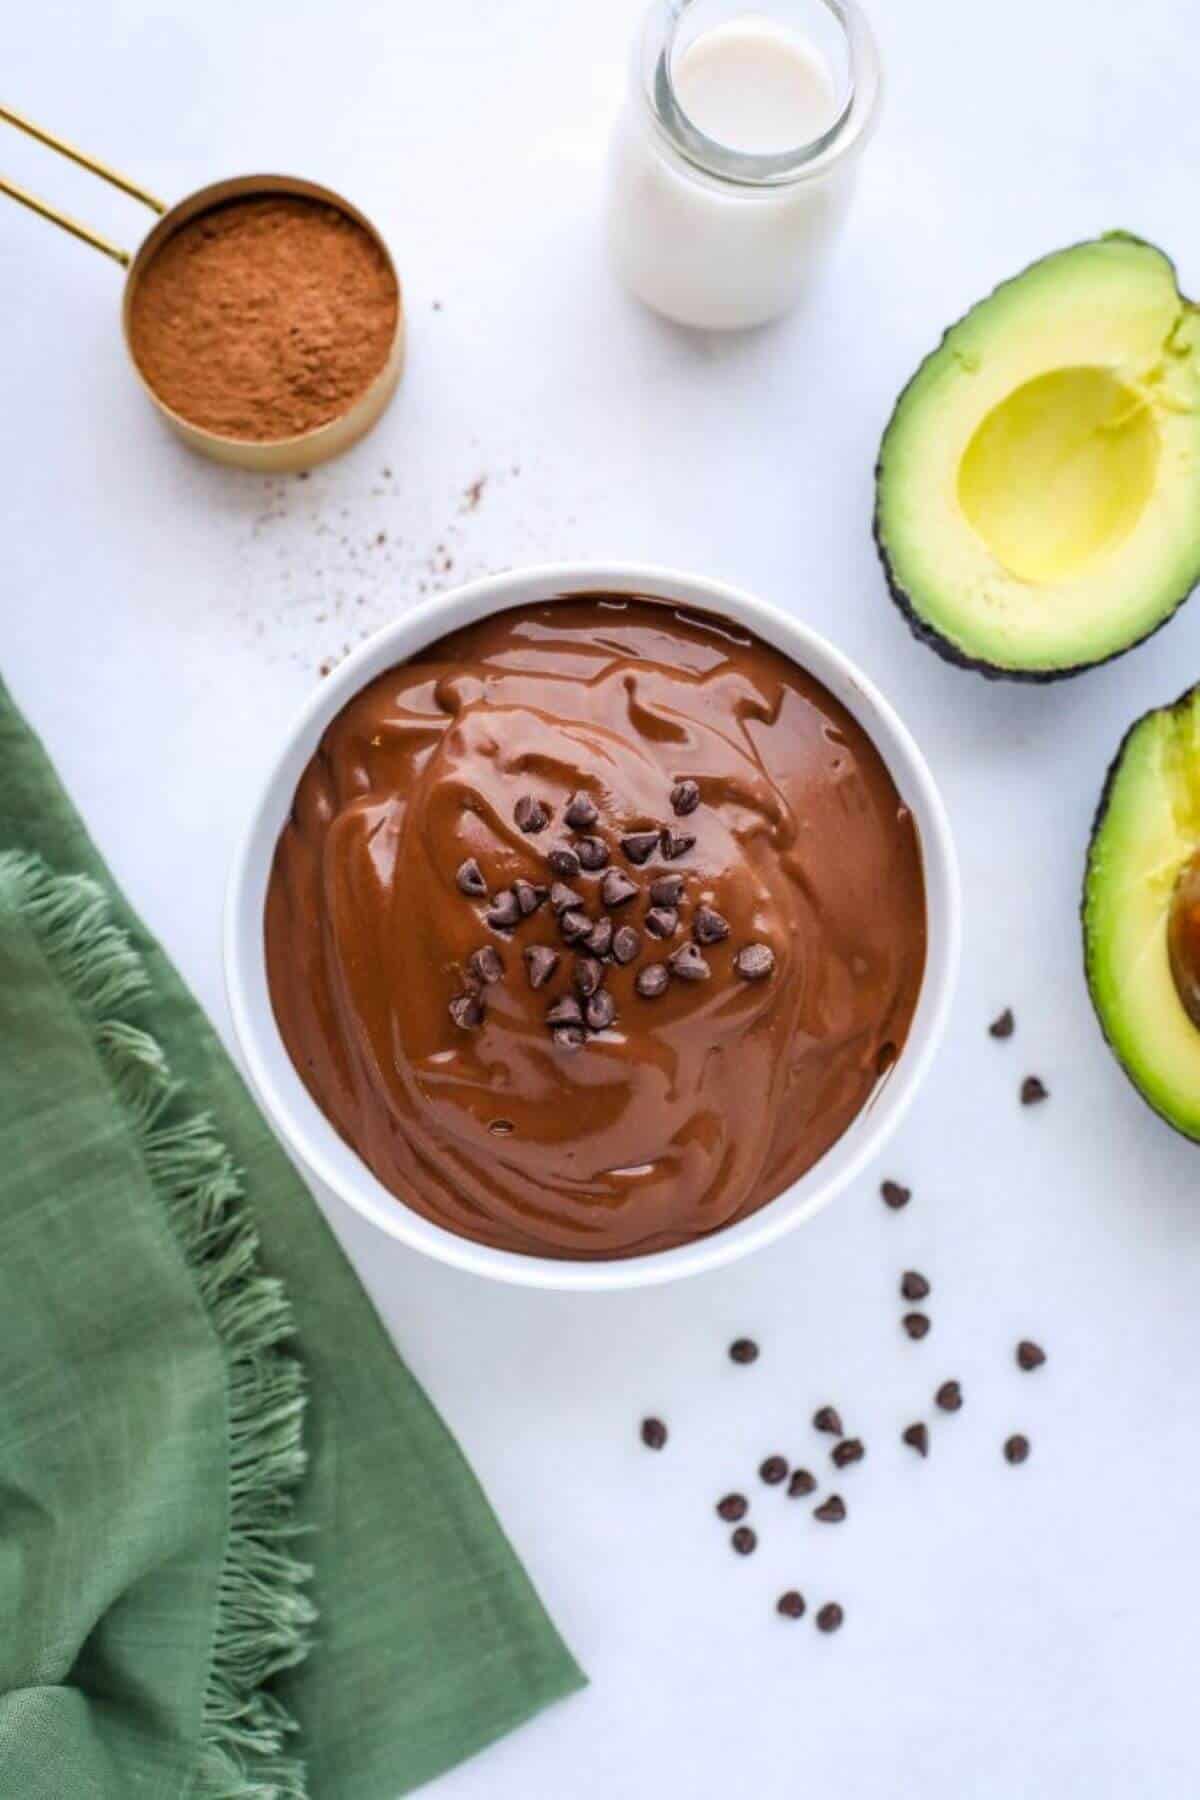 Jar with chocolate avocado smoothie. A spoon of cinnamon on the site, glass of milk and two halves of the avocado. 